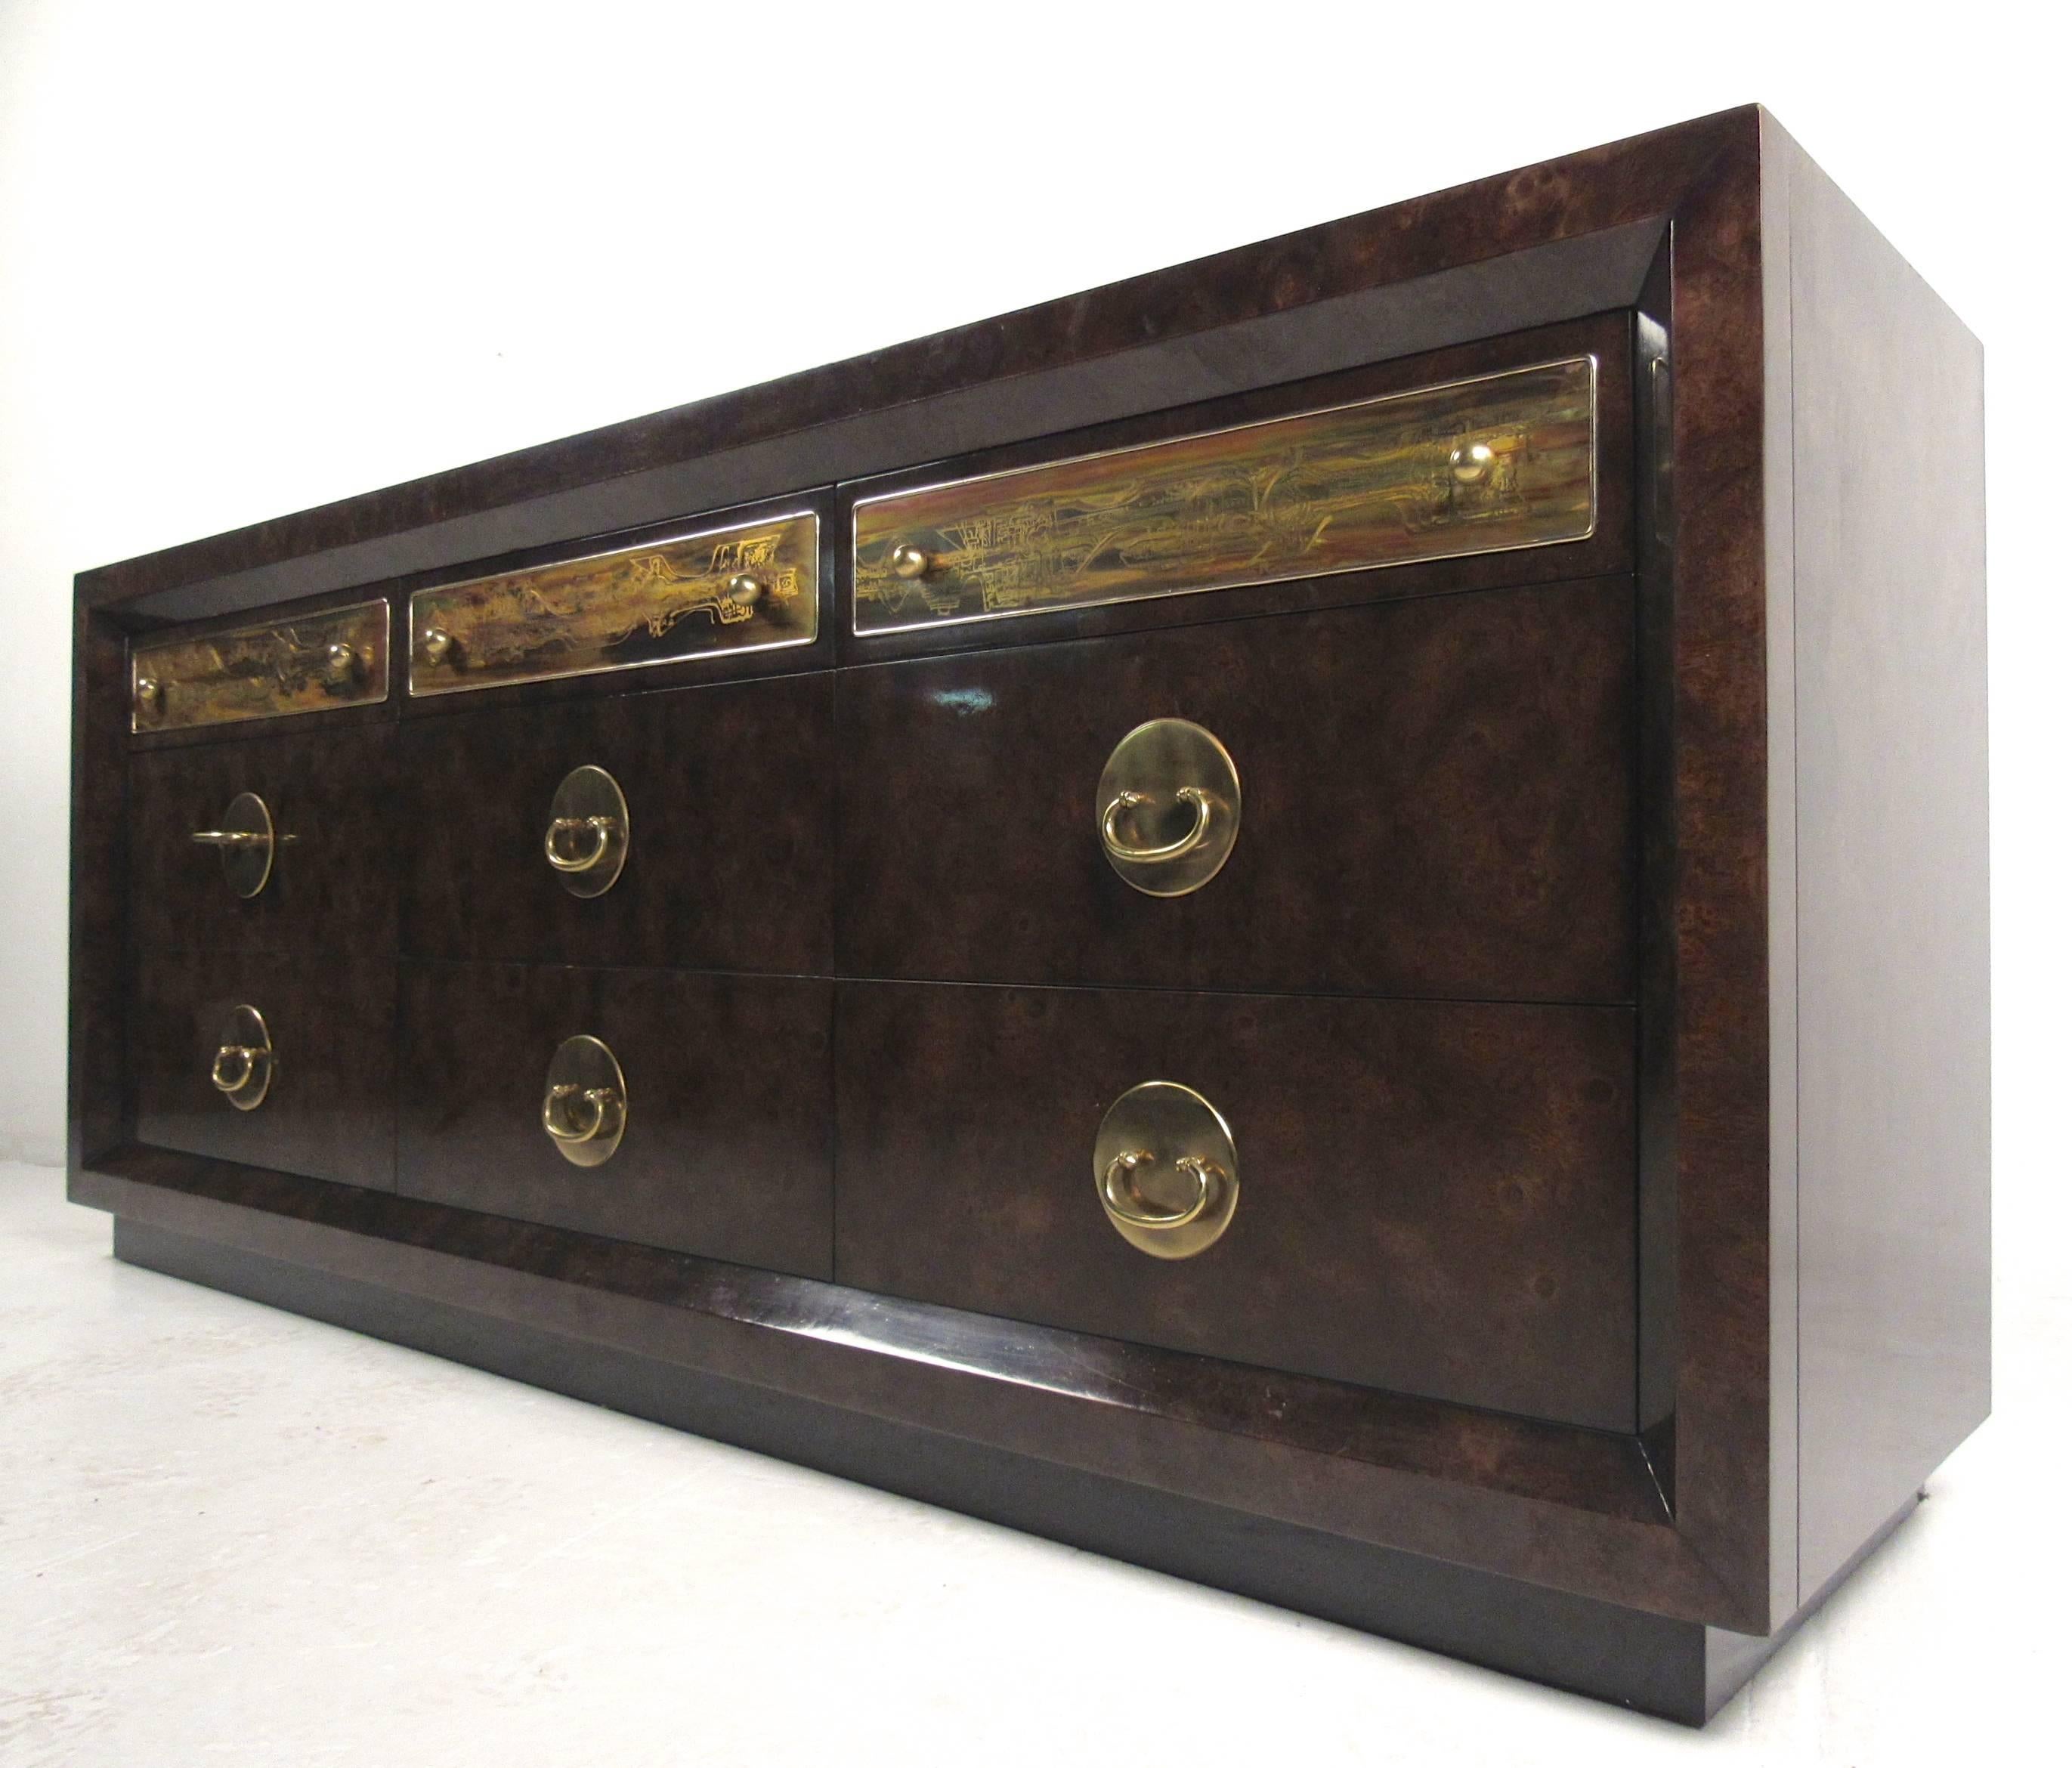 This Mastercraft dresser features acid-etched designs, unique brass pulls, and quality vintage construction. Wonderful burl wood finish adds to this stylish storage piece, making it a unique addition to any interior. Please confirm item location (NY